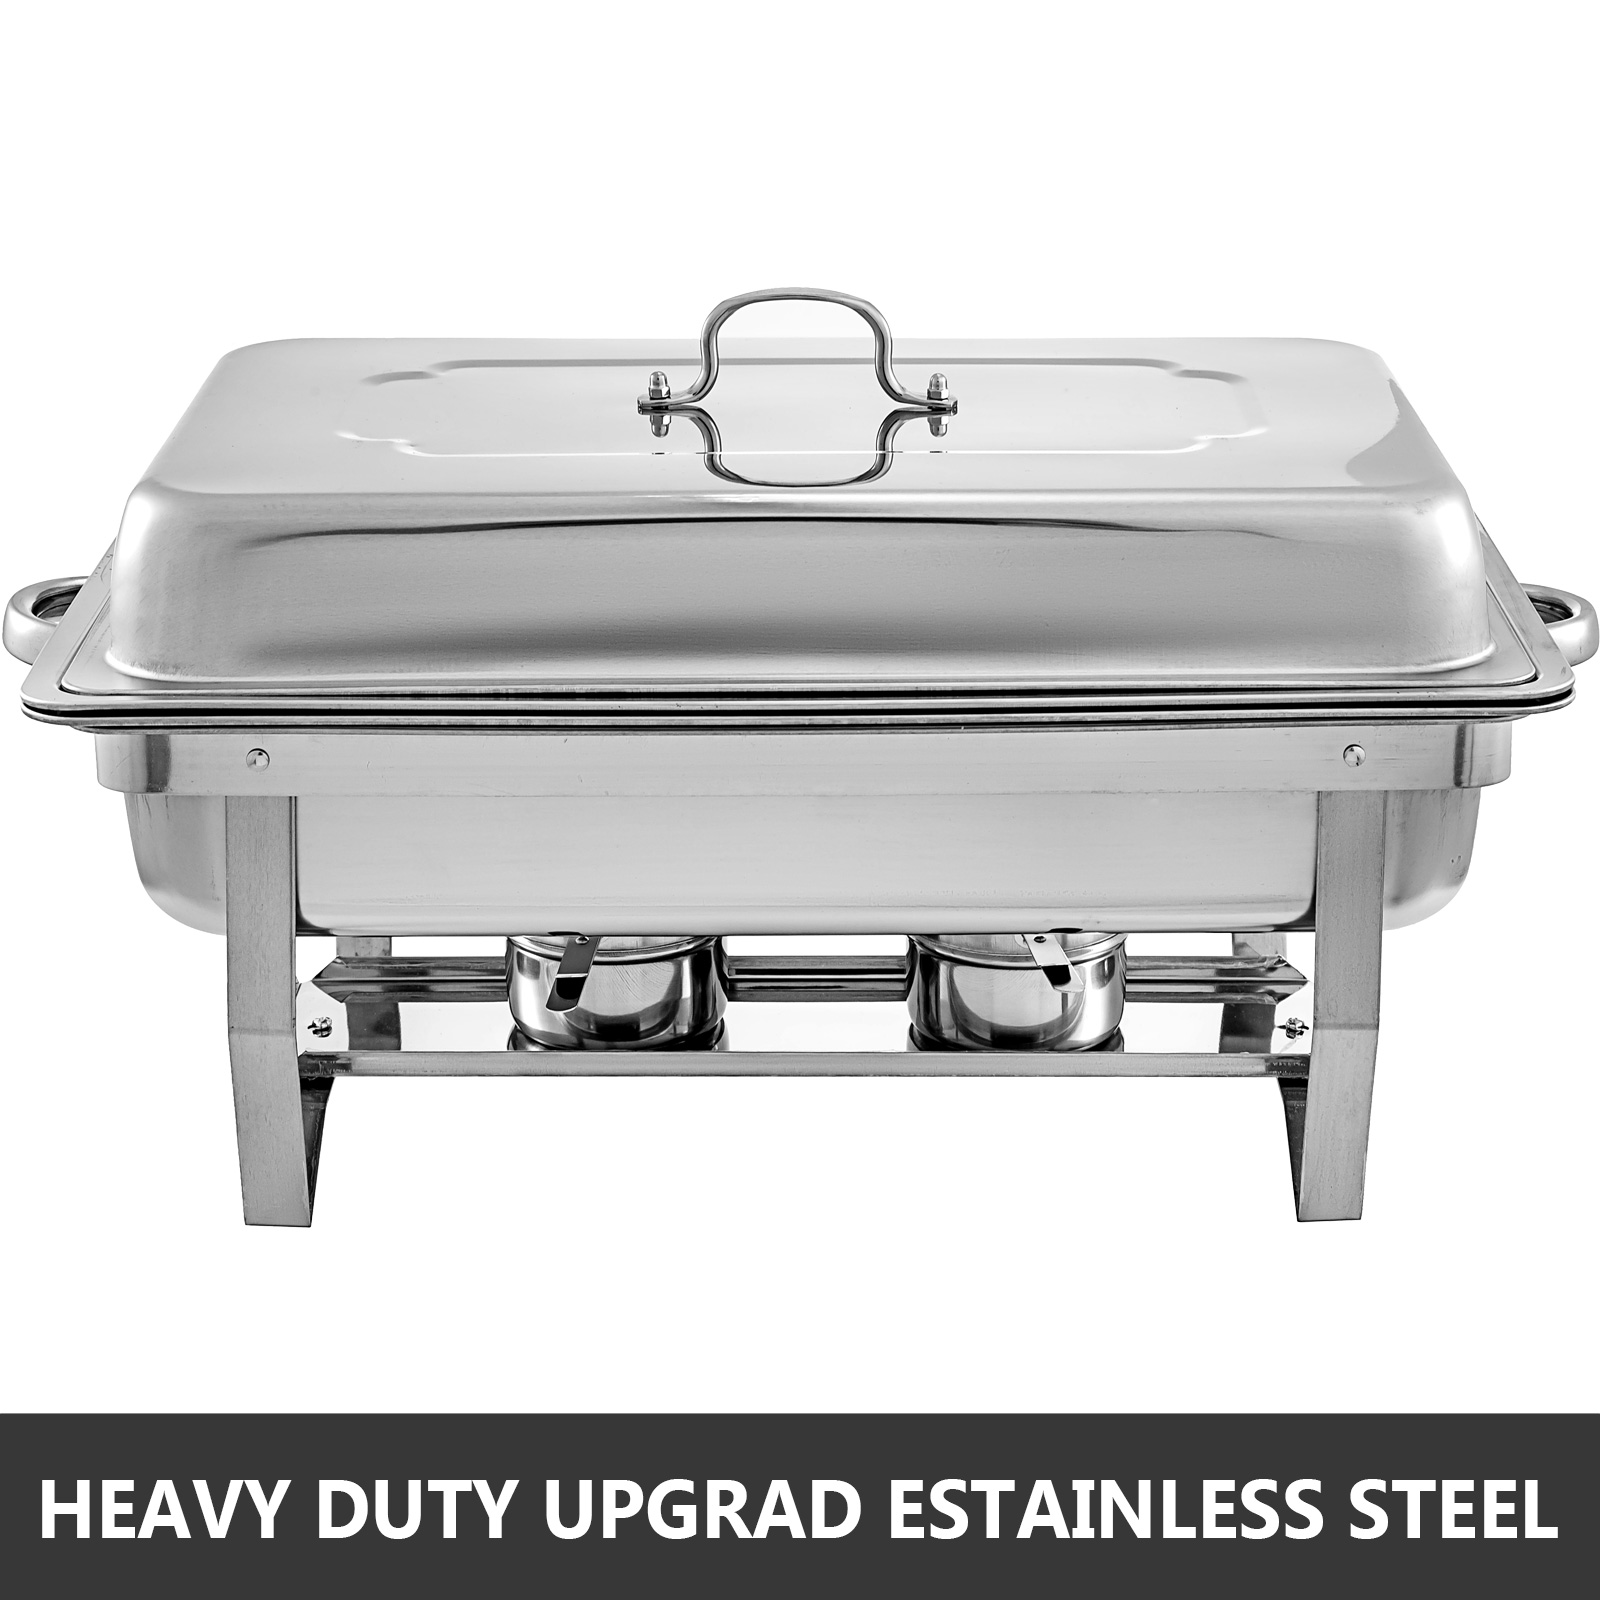 12 PACK FULL SIZE BUFFET CATERING STAINLESS STEEL CHAFER CHAFING DISH SETS 8 QT 